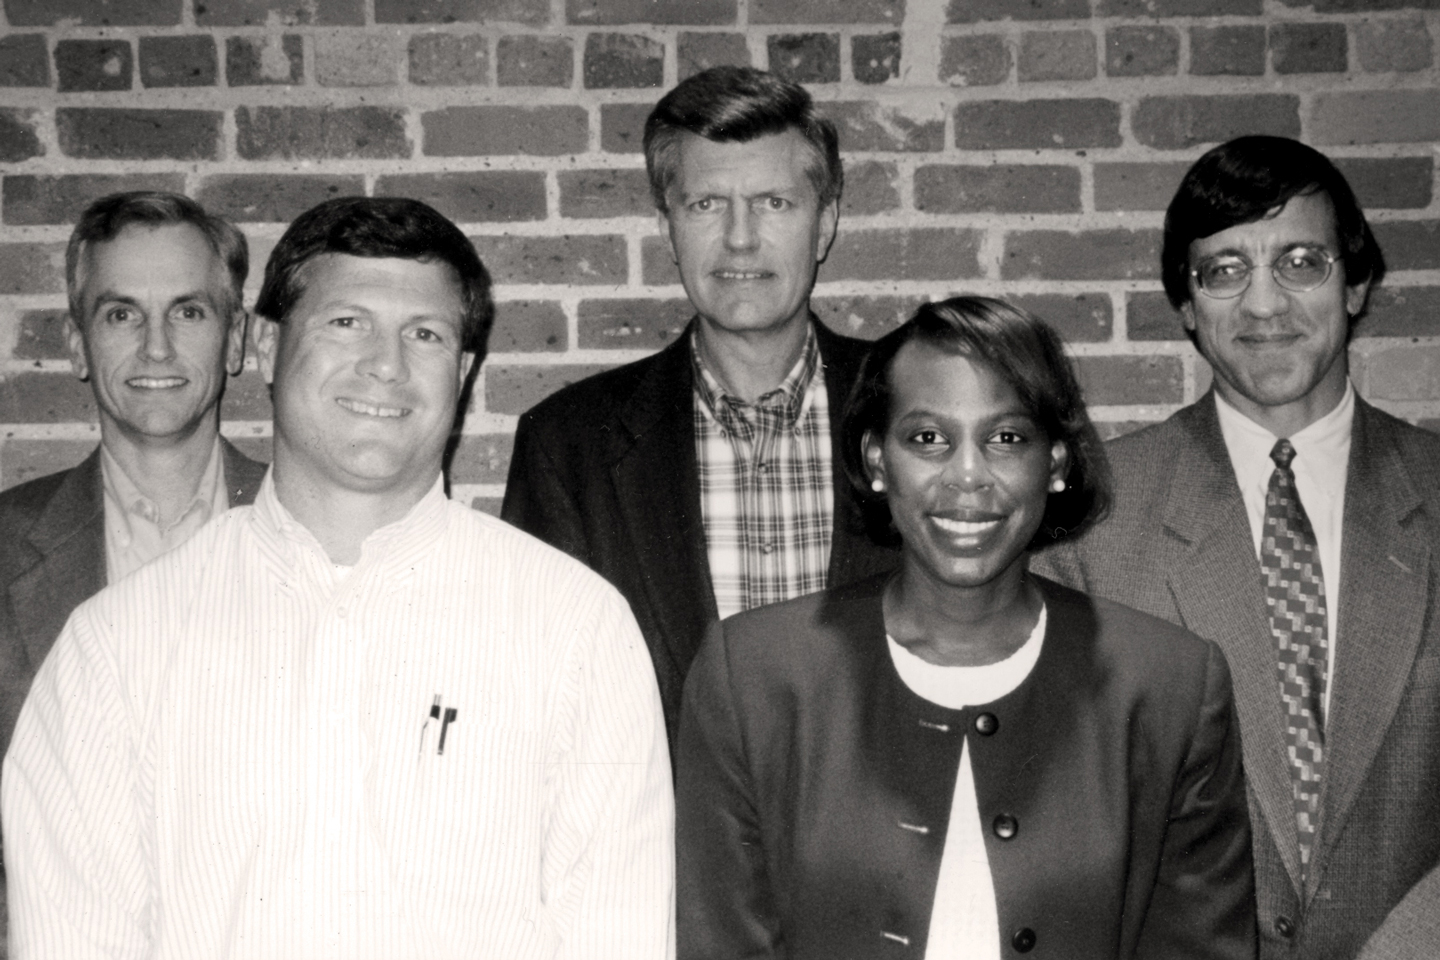 UF's first Board of Directors in 1999, left to right: Dave Hargett, Mark Taylor, Carlton Owen, Joan Peters, and Brad Wyche